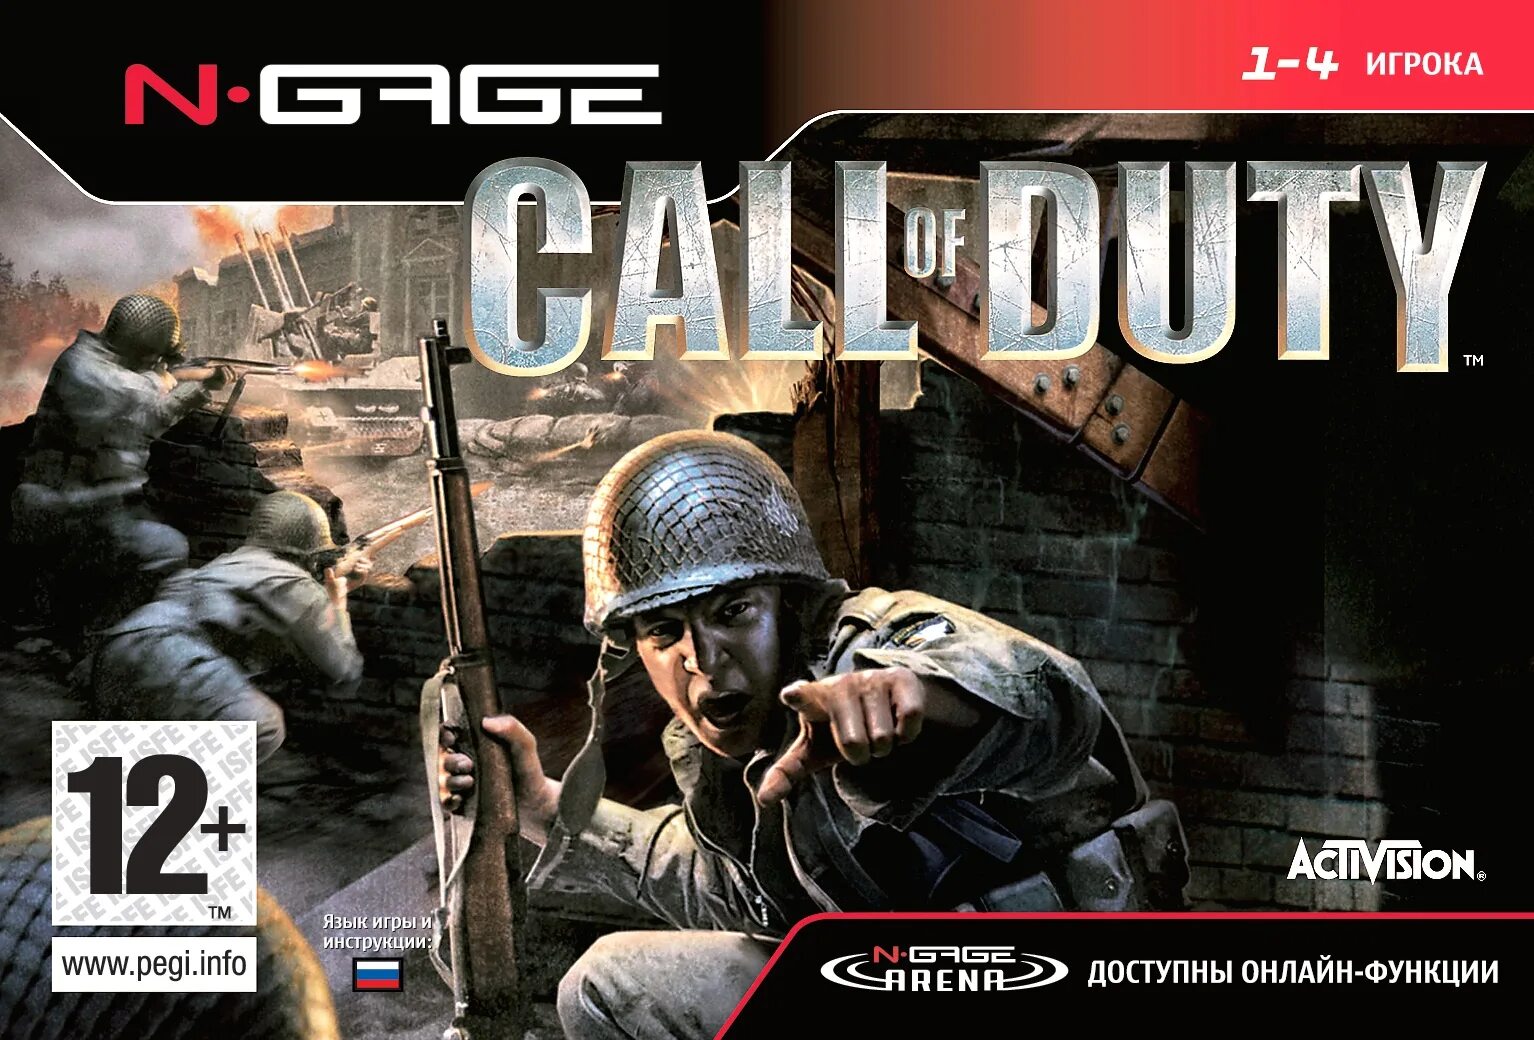 Call of duty 2004. Call of Duty 1 2003 диск. Nokia n-Gage Call of Duty. Call of Duty 3 для Nokia n-Gage. Call of Duty n Gage.